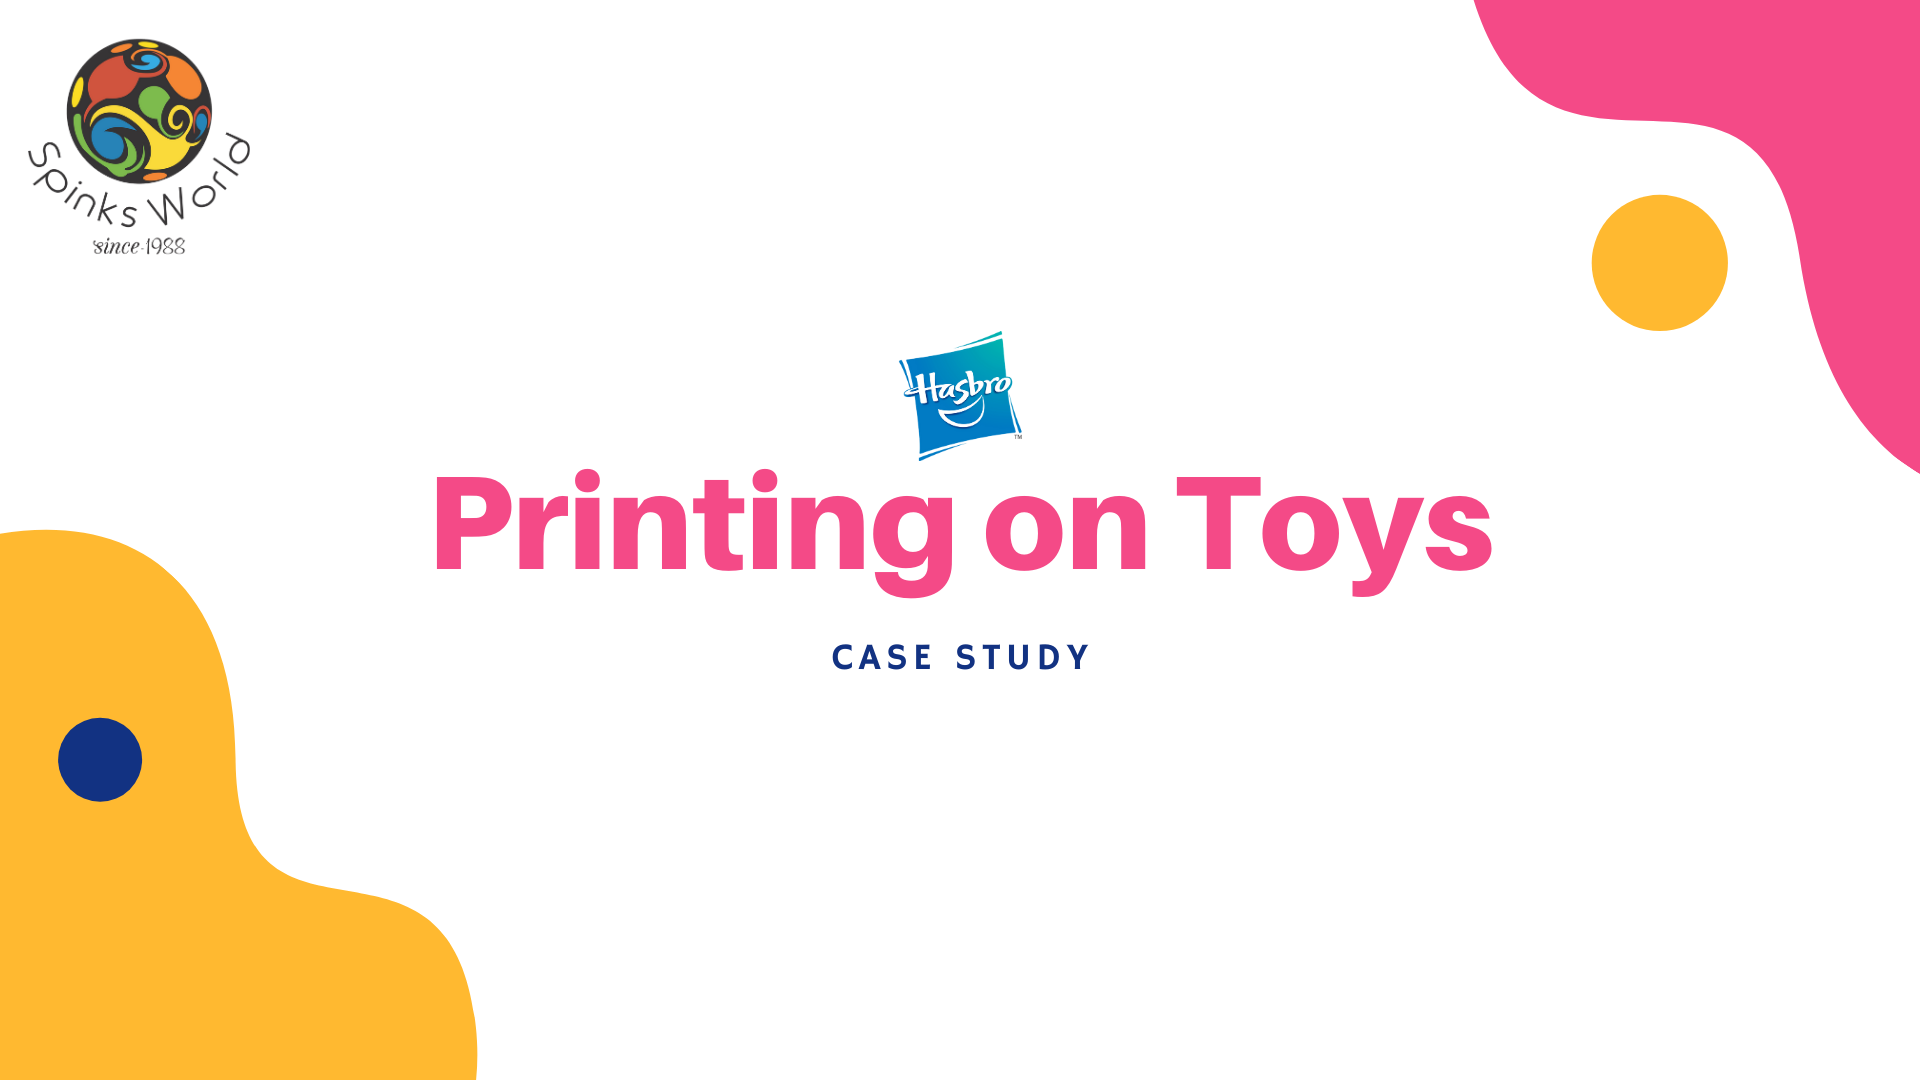 Printing on toys (A case study)